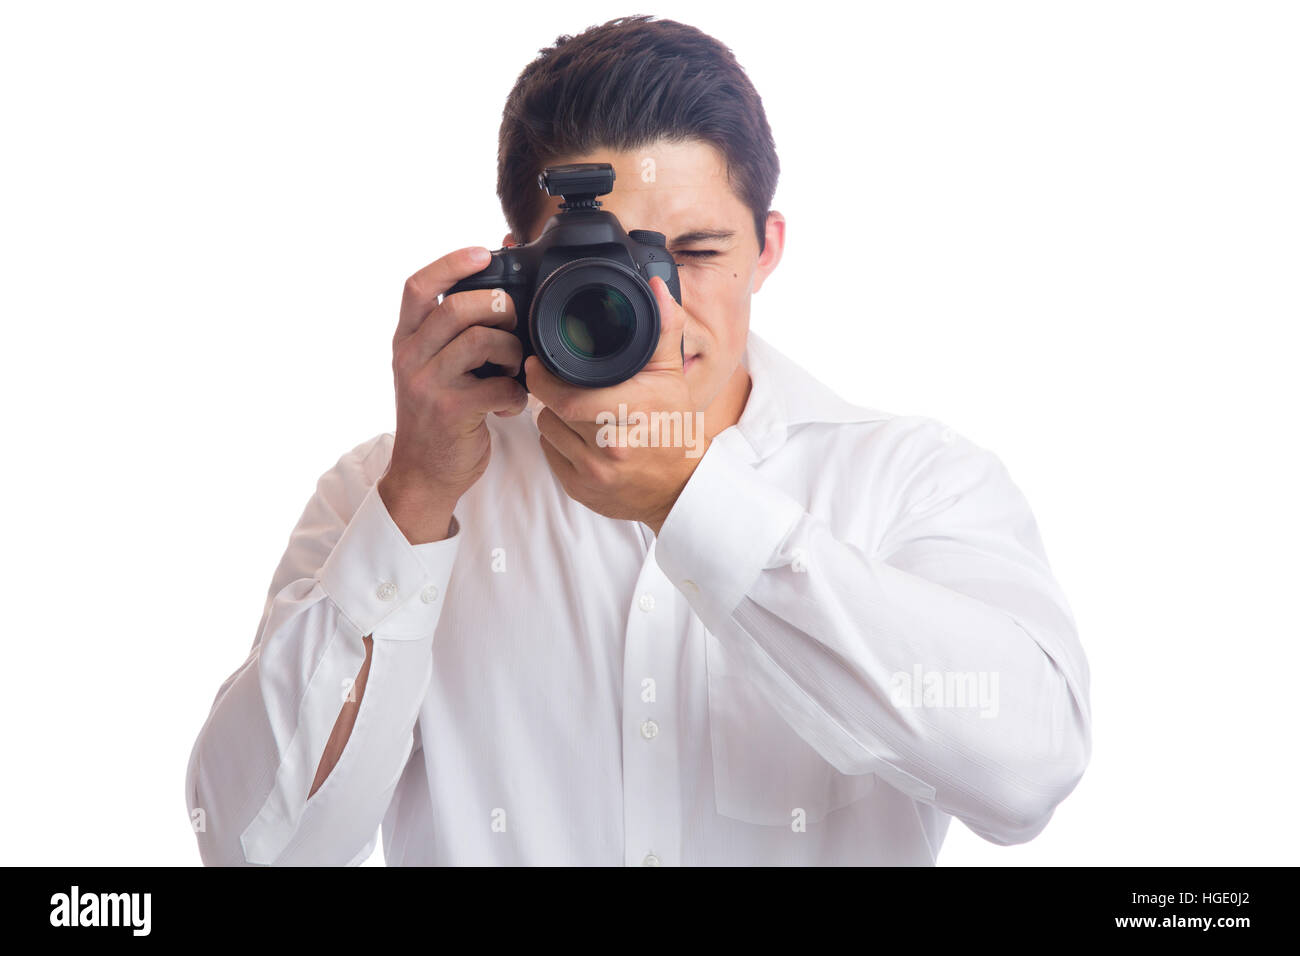 Photographer trainee photography photos camera occupation hobby isolated on a white background Stock Photo